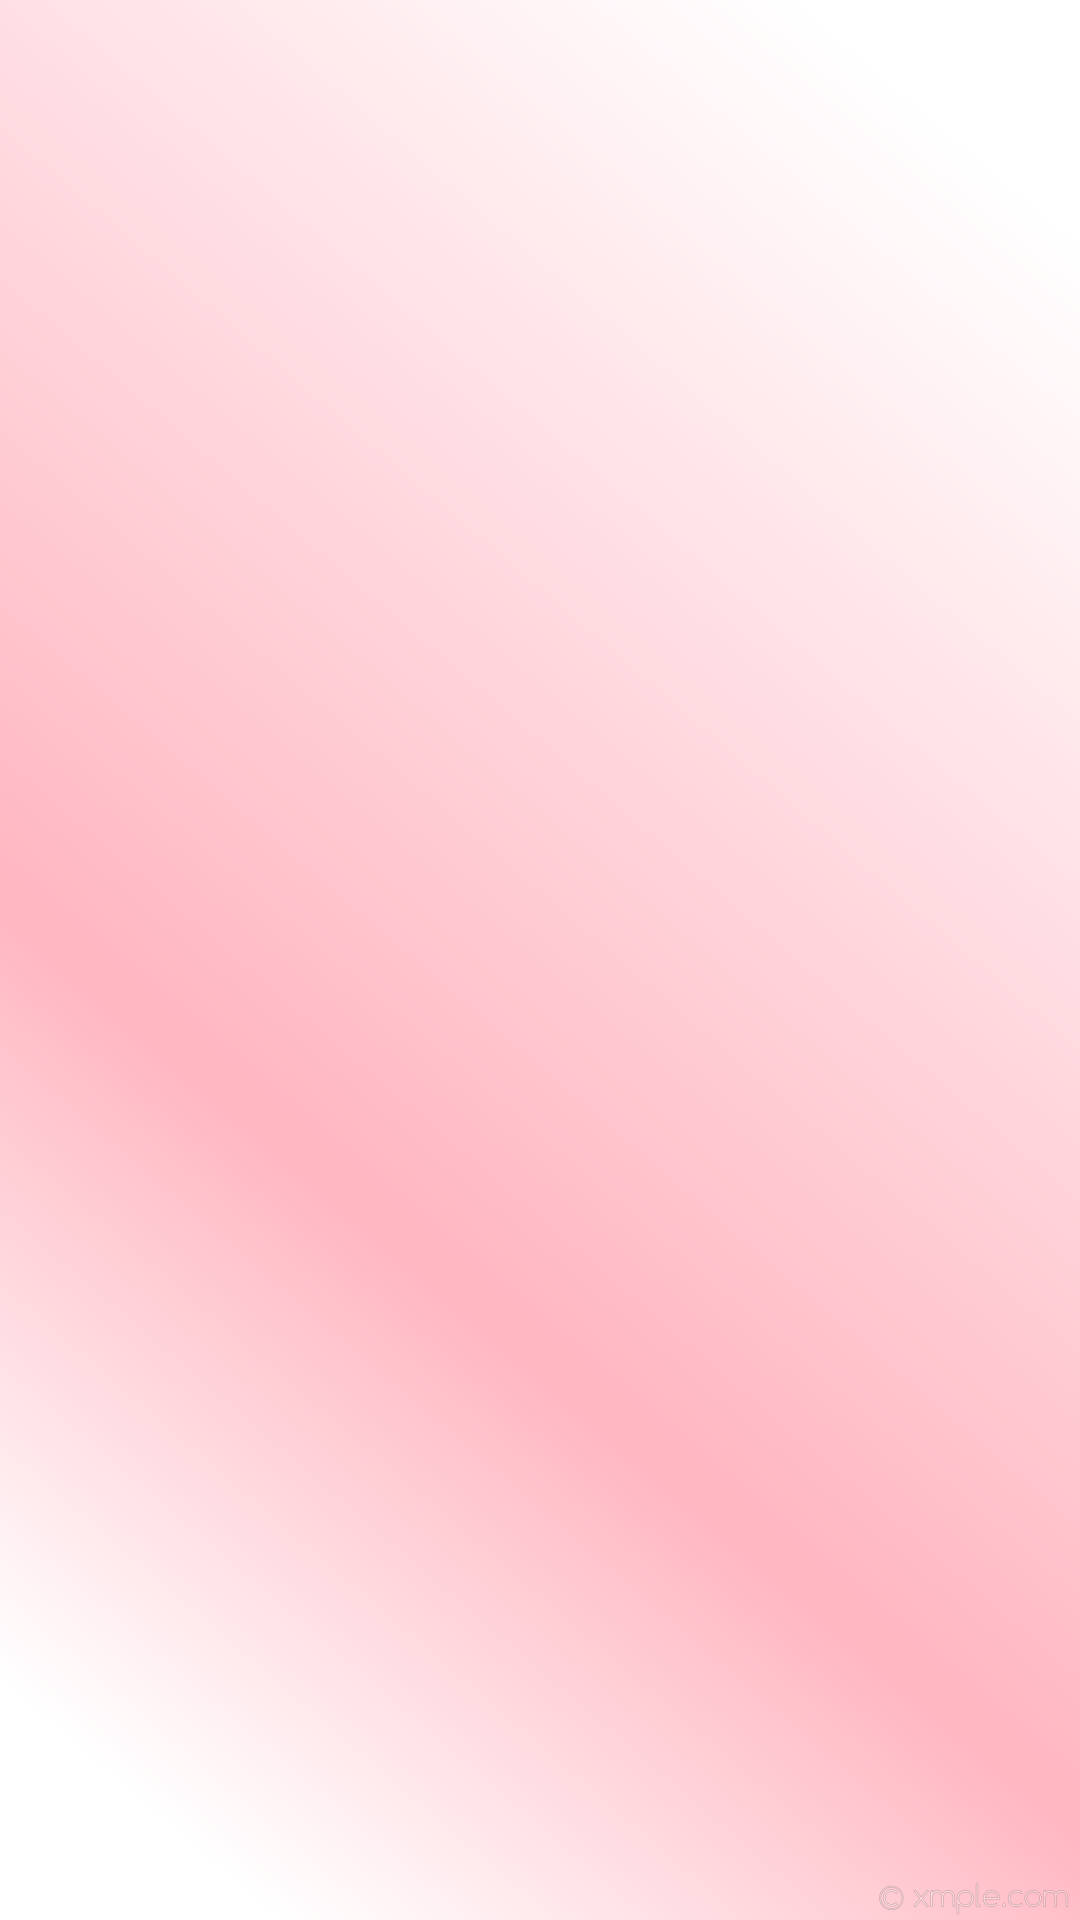 Pink And White Pastel Gradient Wallpaper